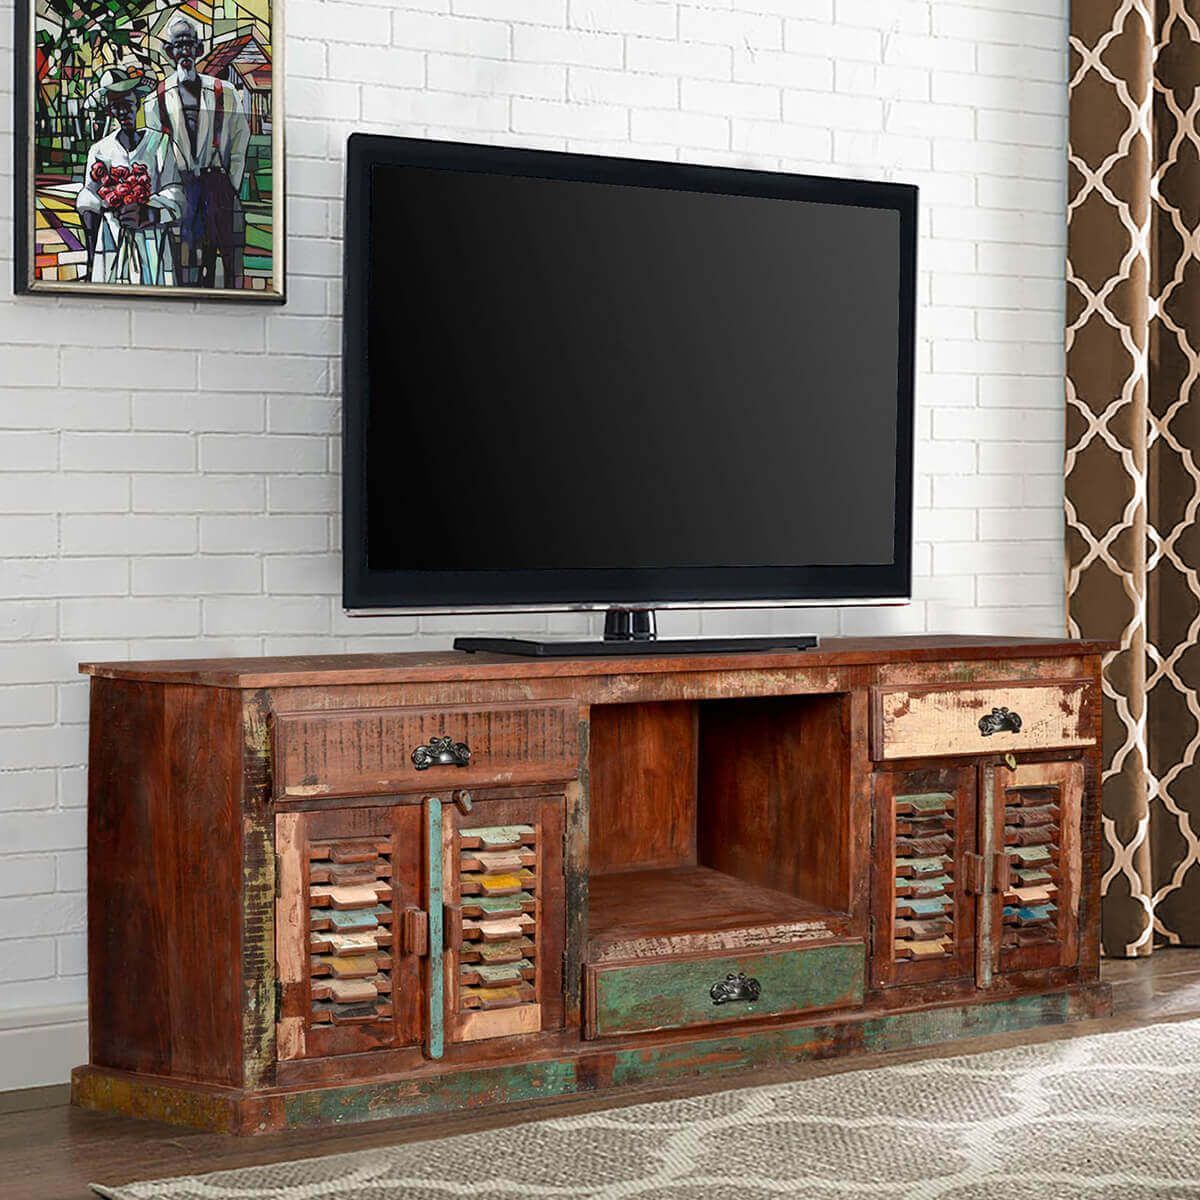 Rustic Reclaimed Wood Large Tv Stand Media Console Intended For Modern Tv Stands In Oak Wood And Black Accents With Storage Doors (View 8 of 15)